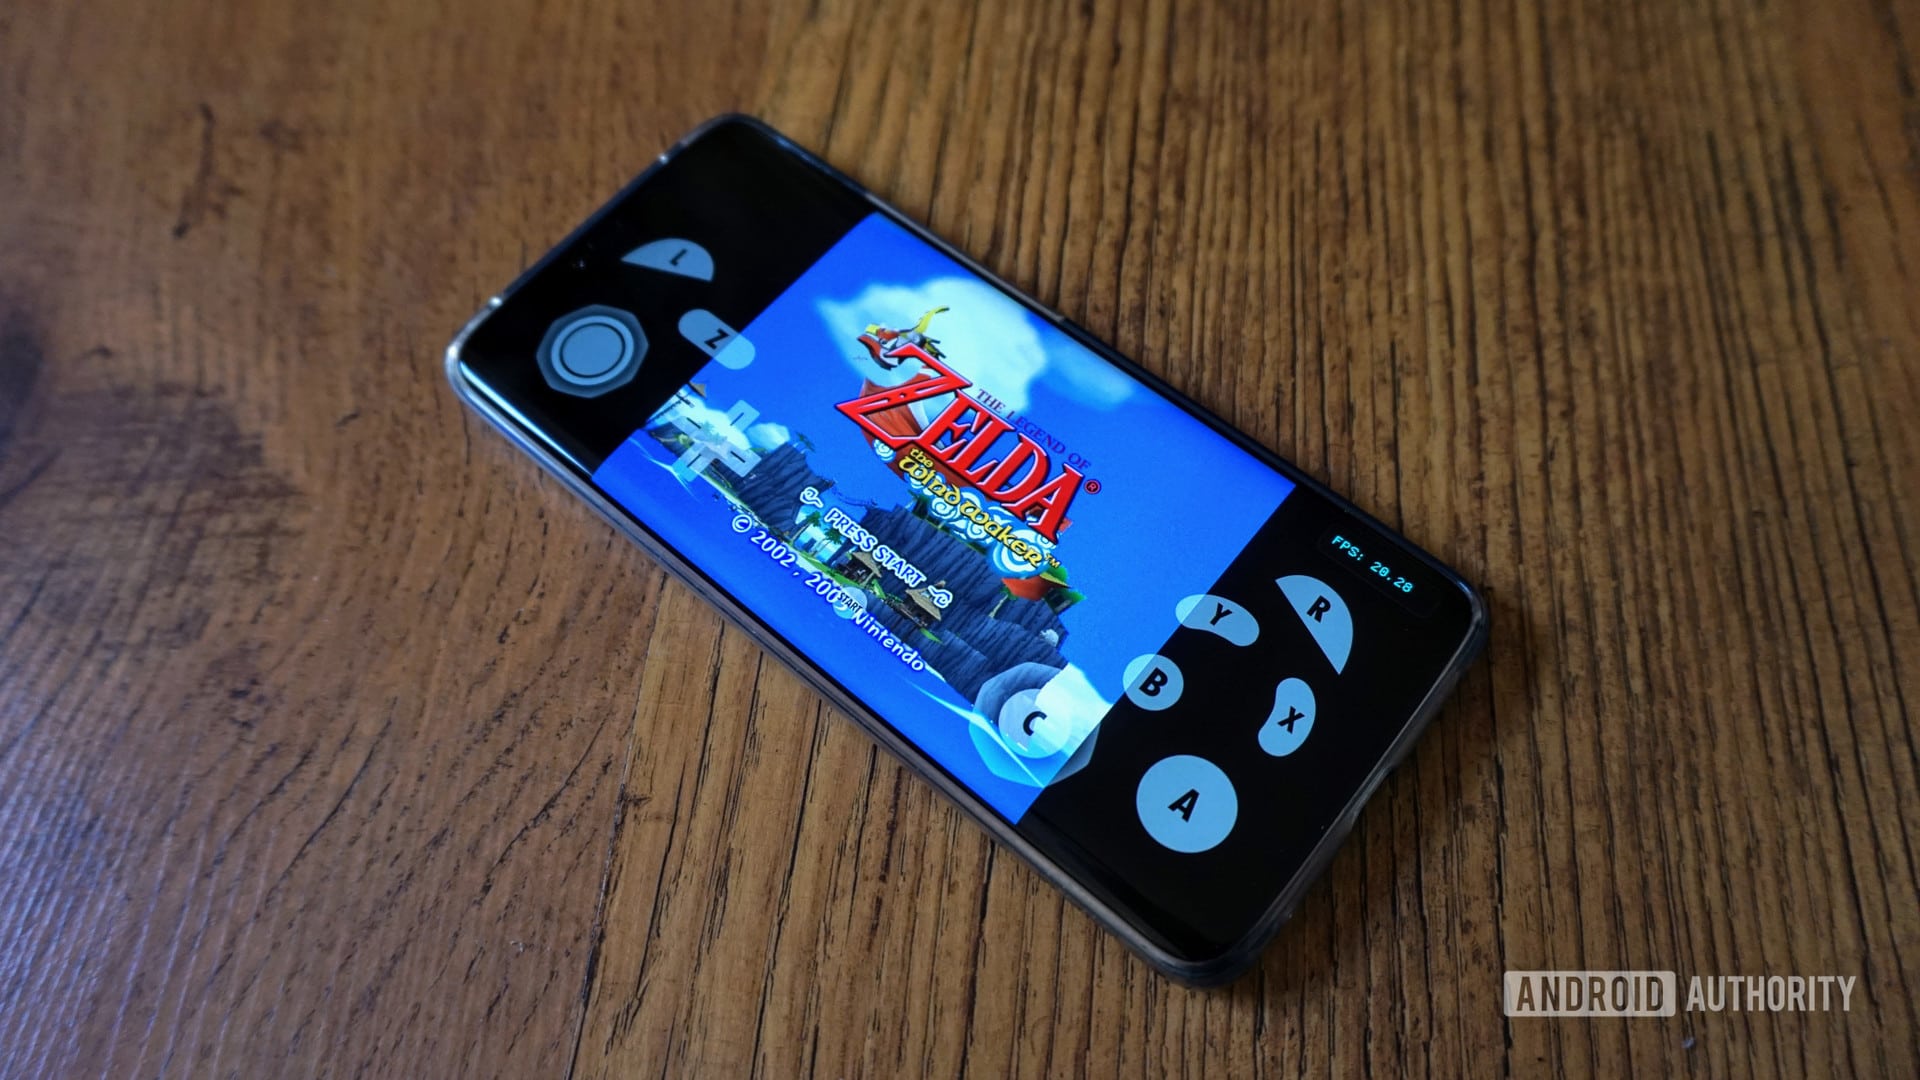 The Legend of Zelda Wind Waker running on Dolphin emulator on an Android smartphone